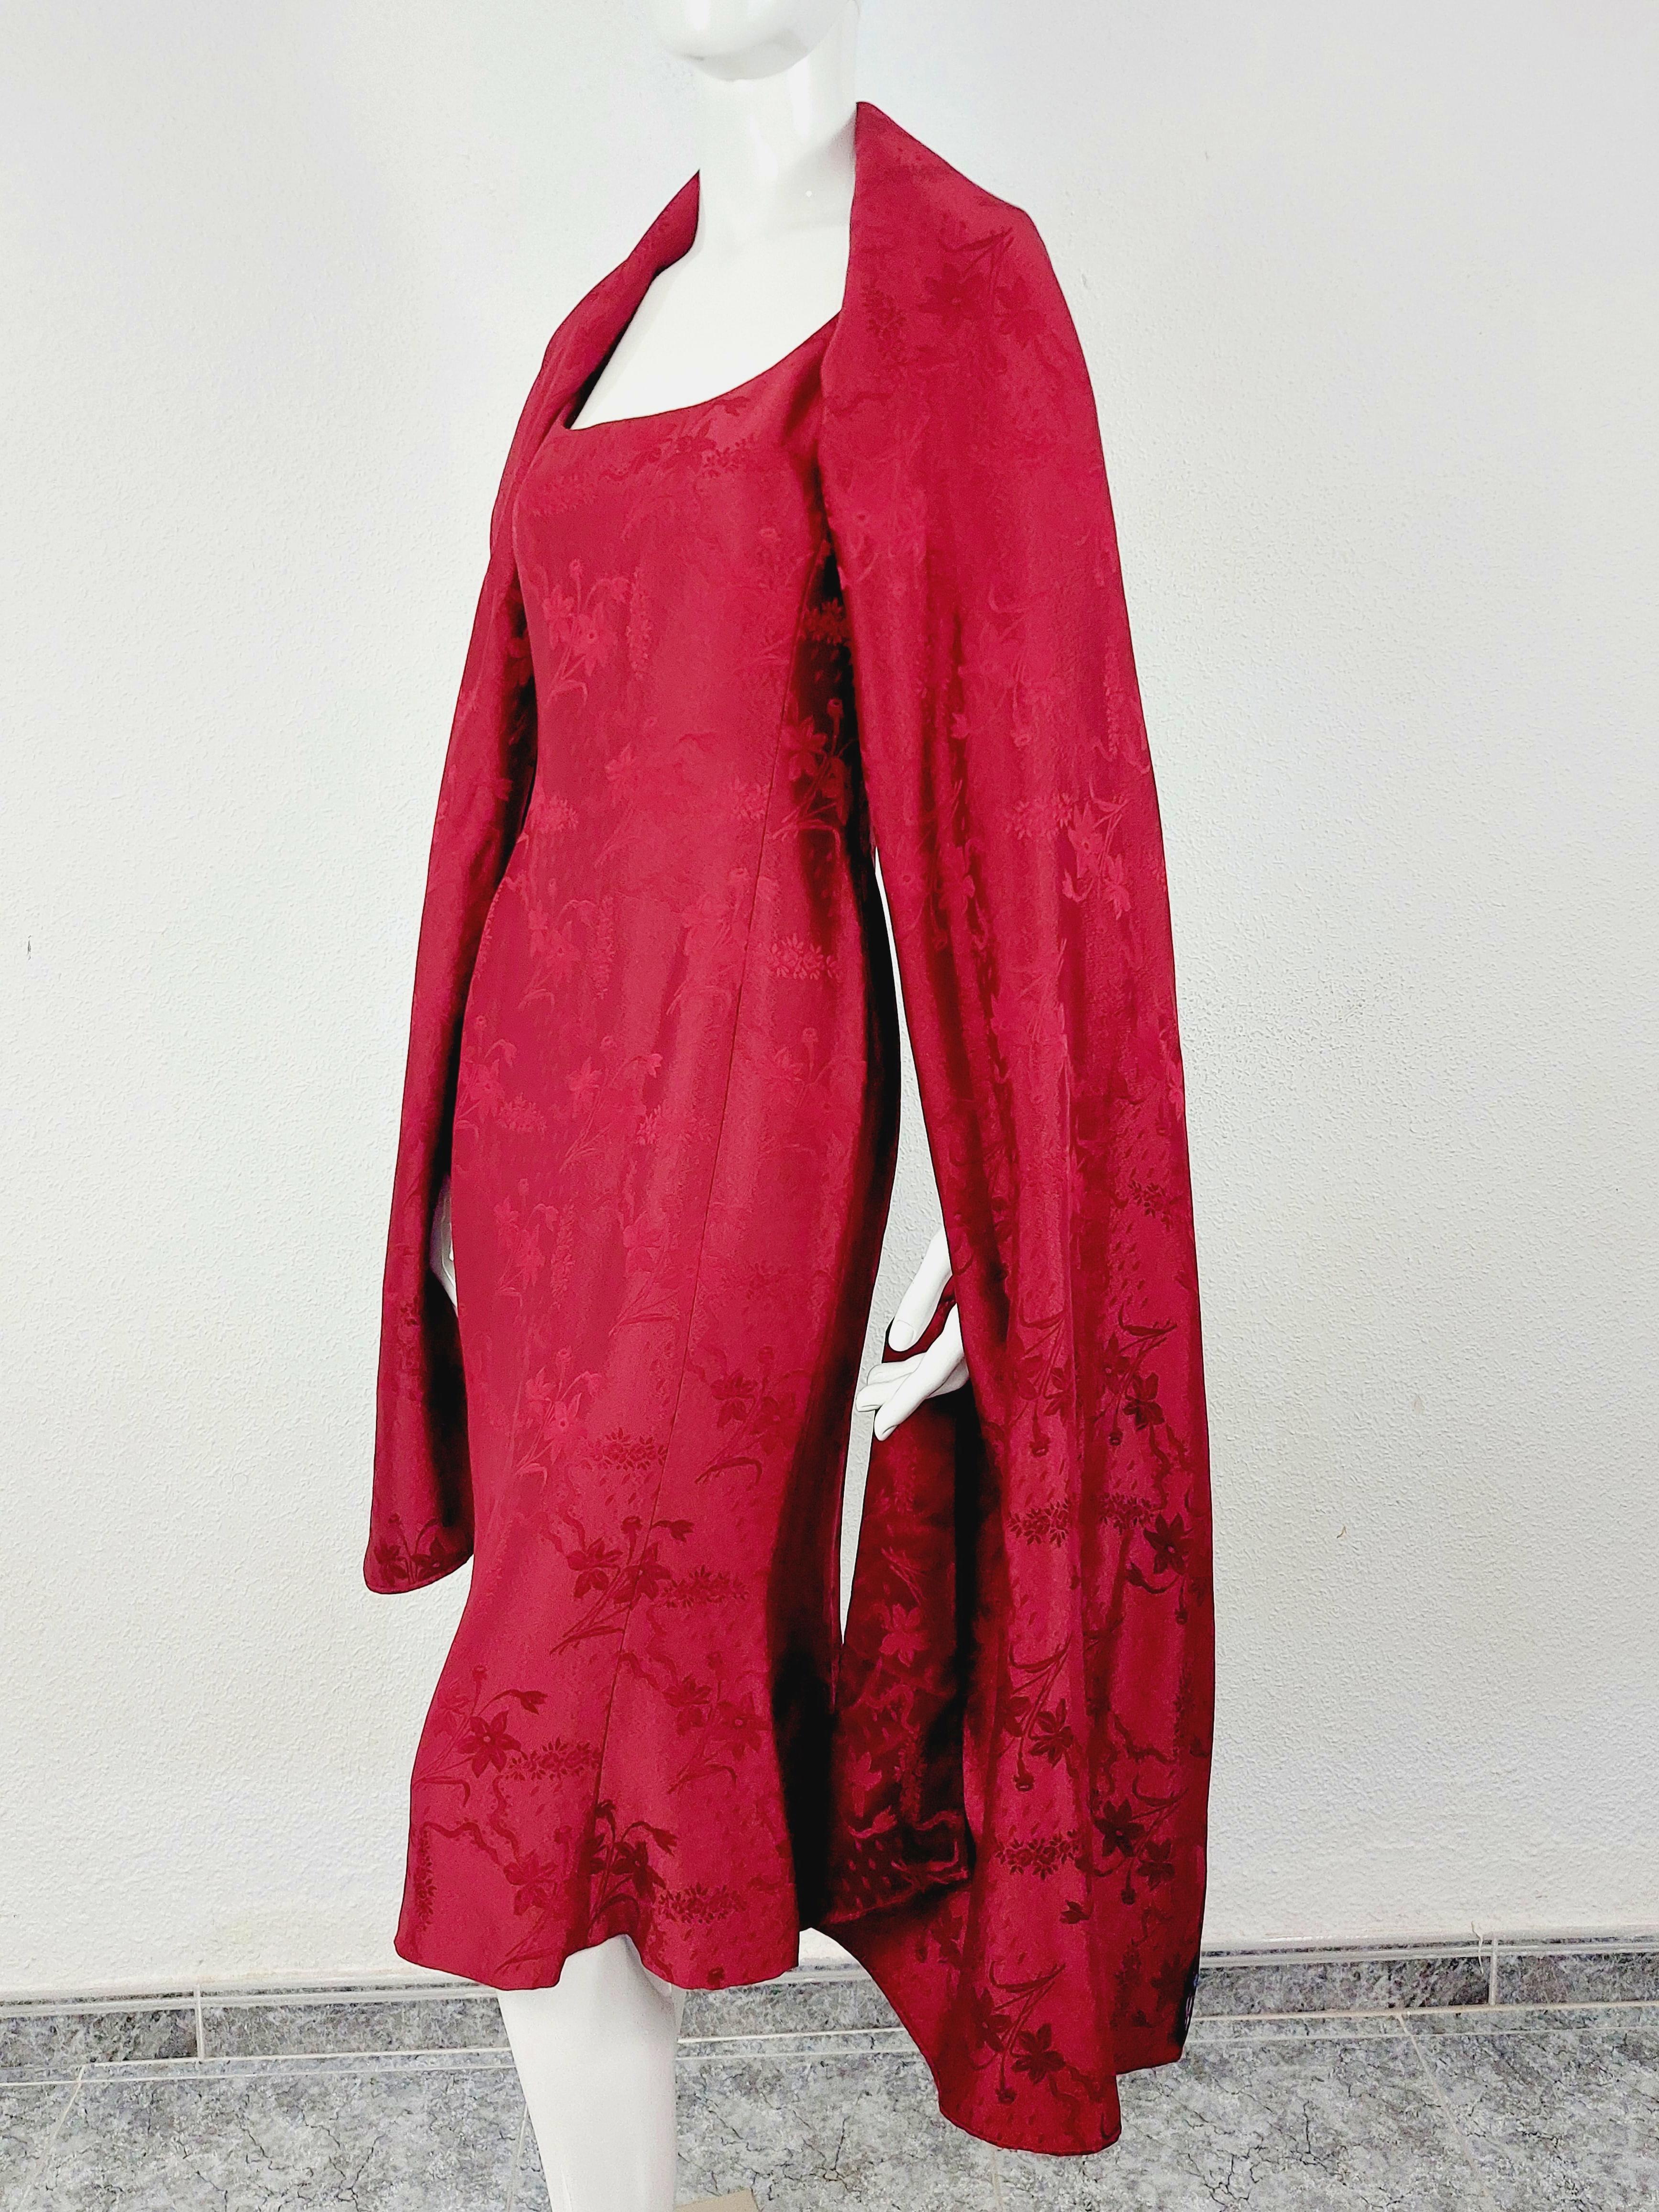 John Galliano London Red Silk Brocade Floral Runway Evening Gown Dress w Stola For Sale 6